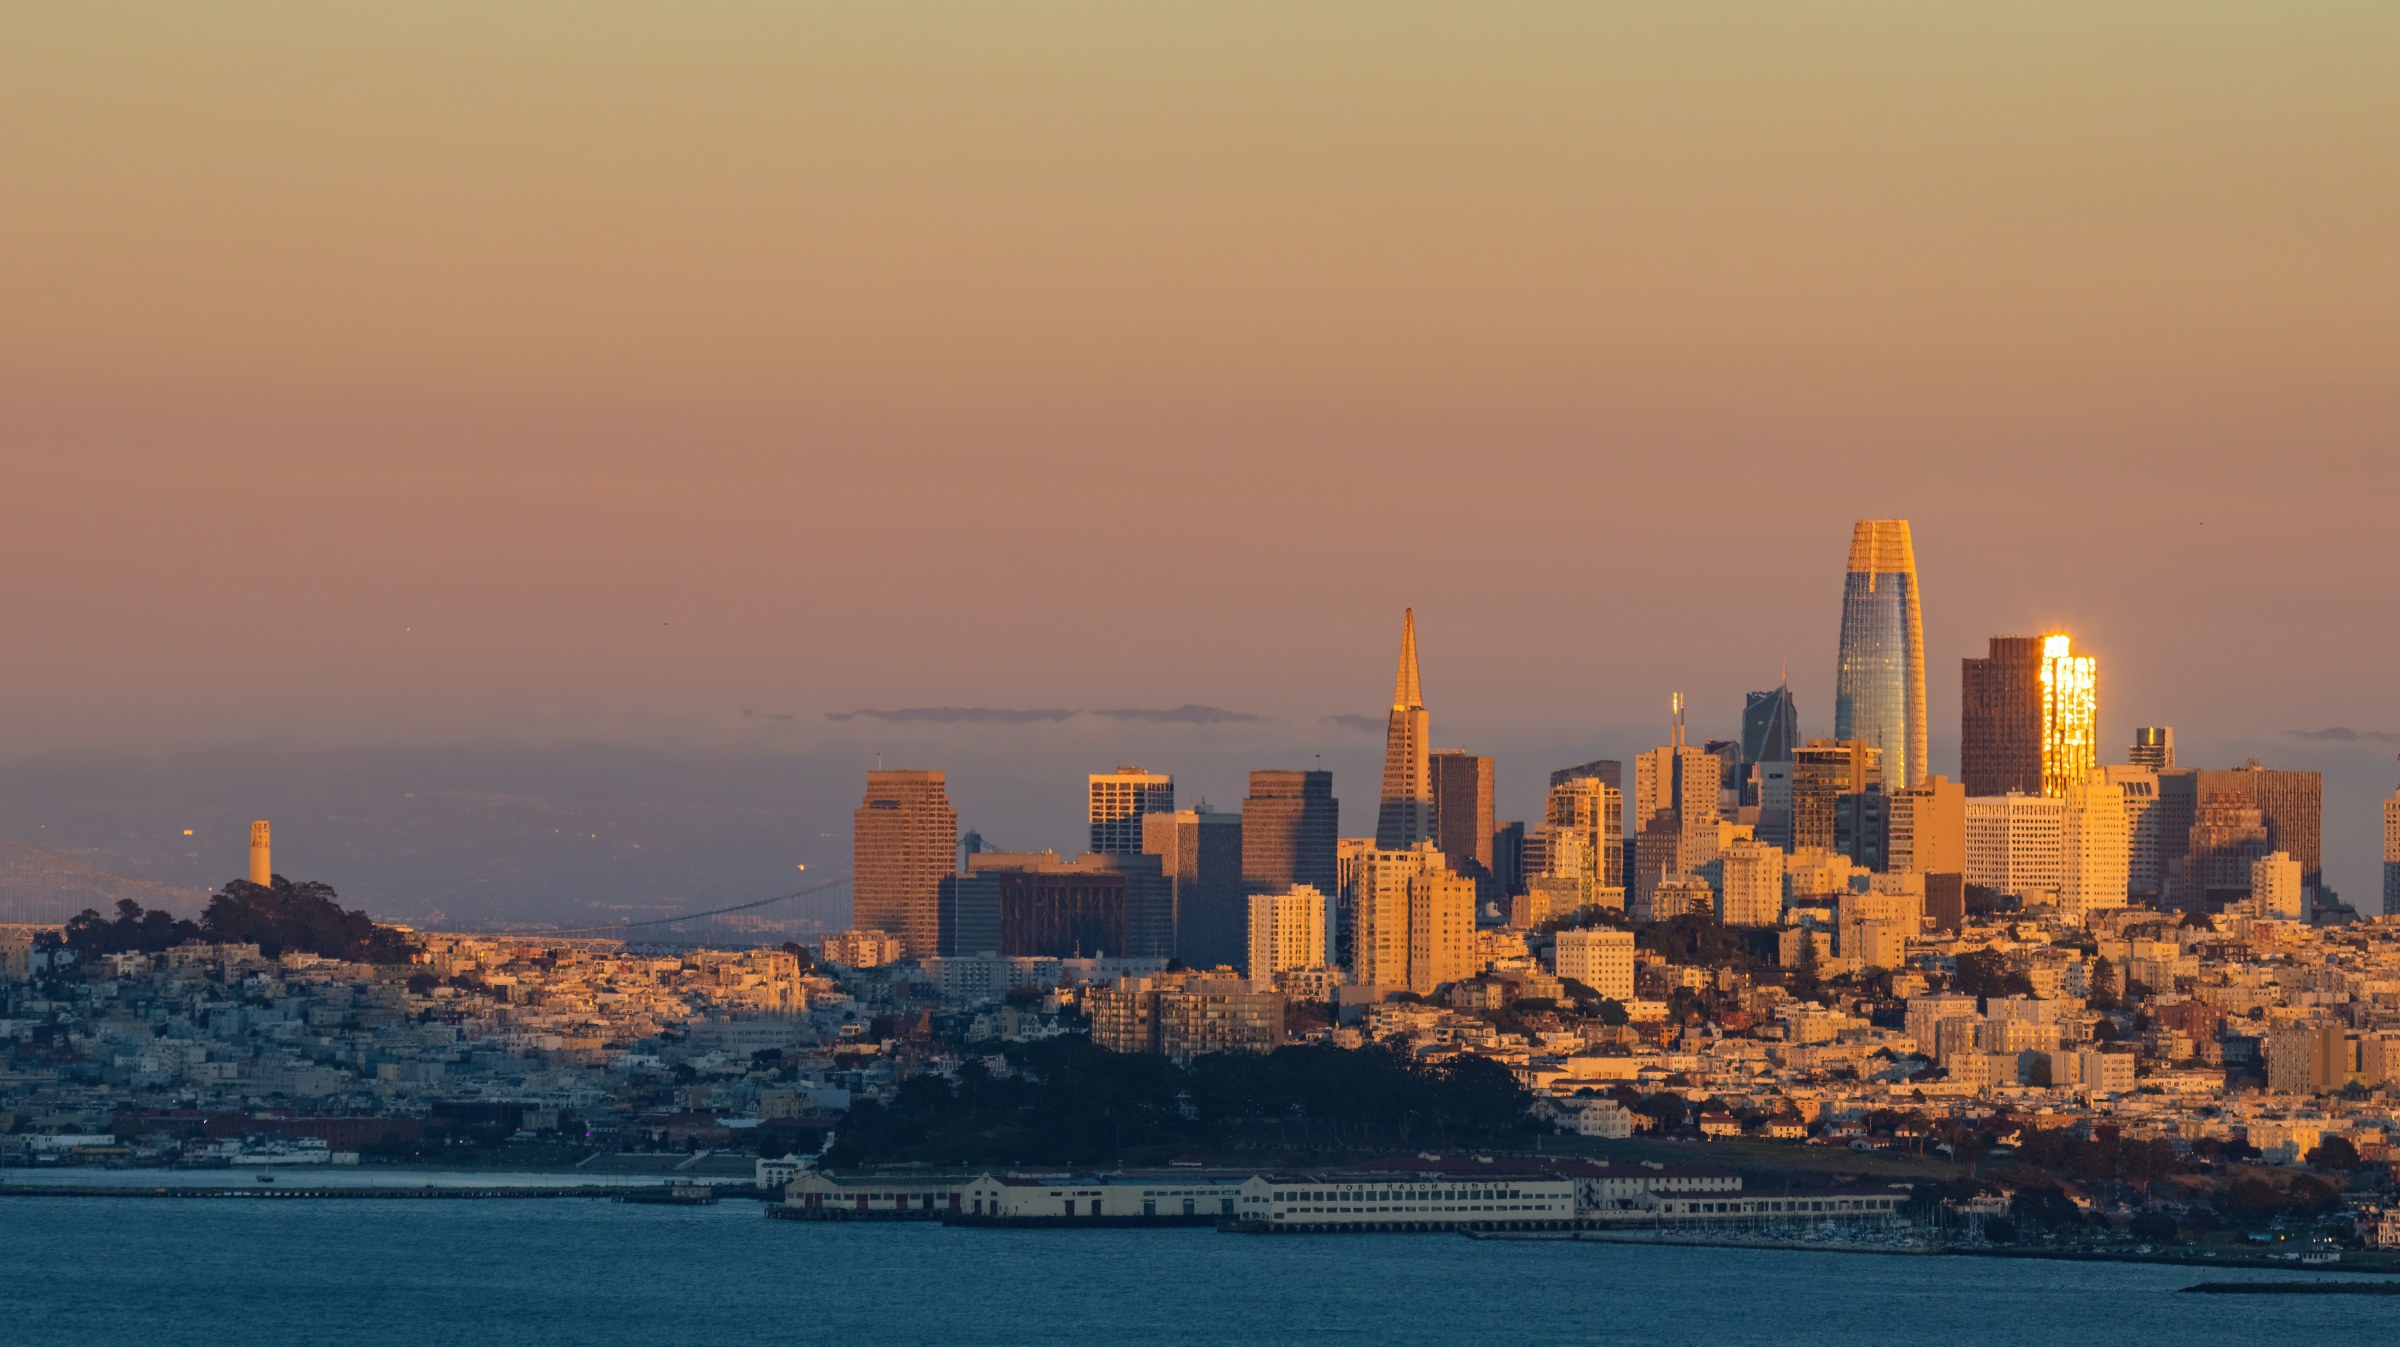 Skyline of San Francisco at sunset with downtown's tall buildings in the distance and the bay in the foreground